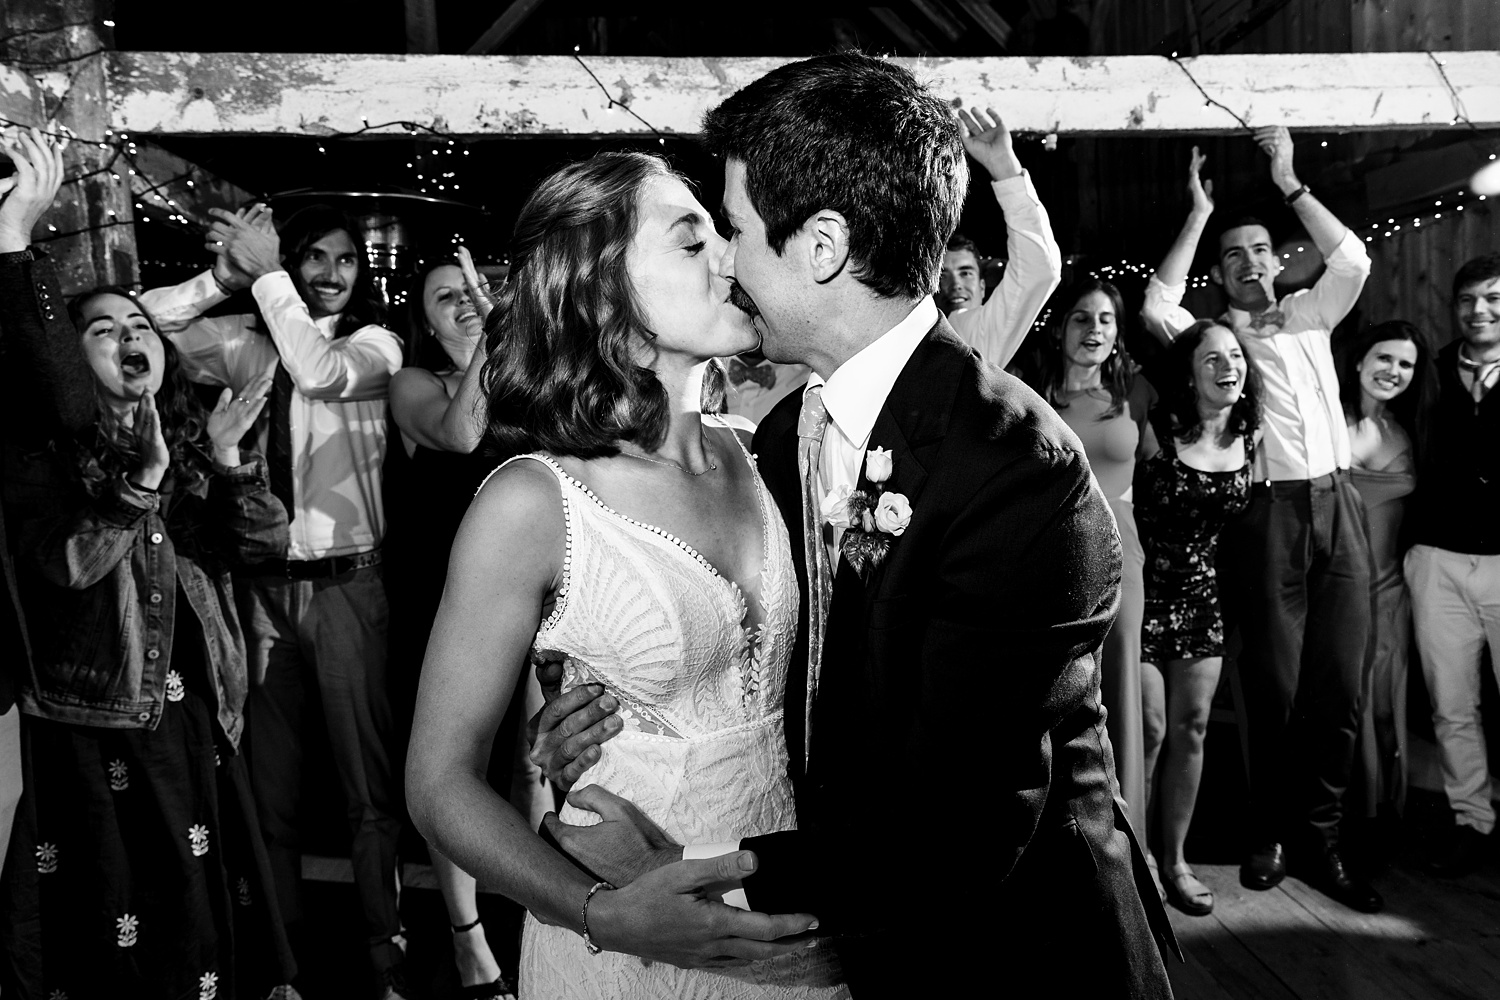 Bride and groom kiss in front of the celebrating guests on their wedding day